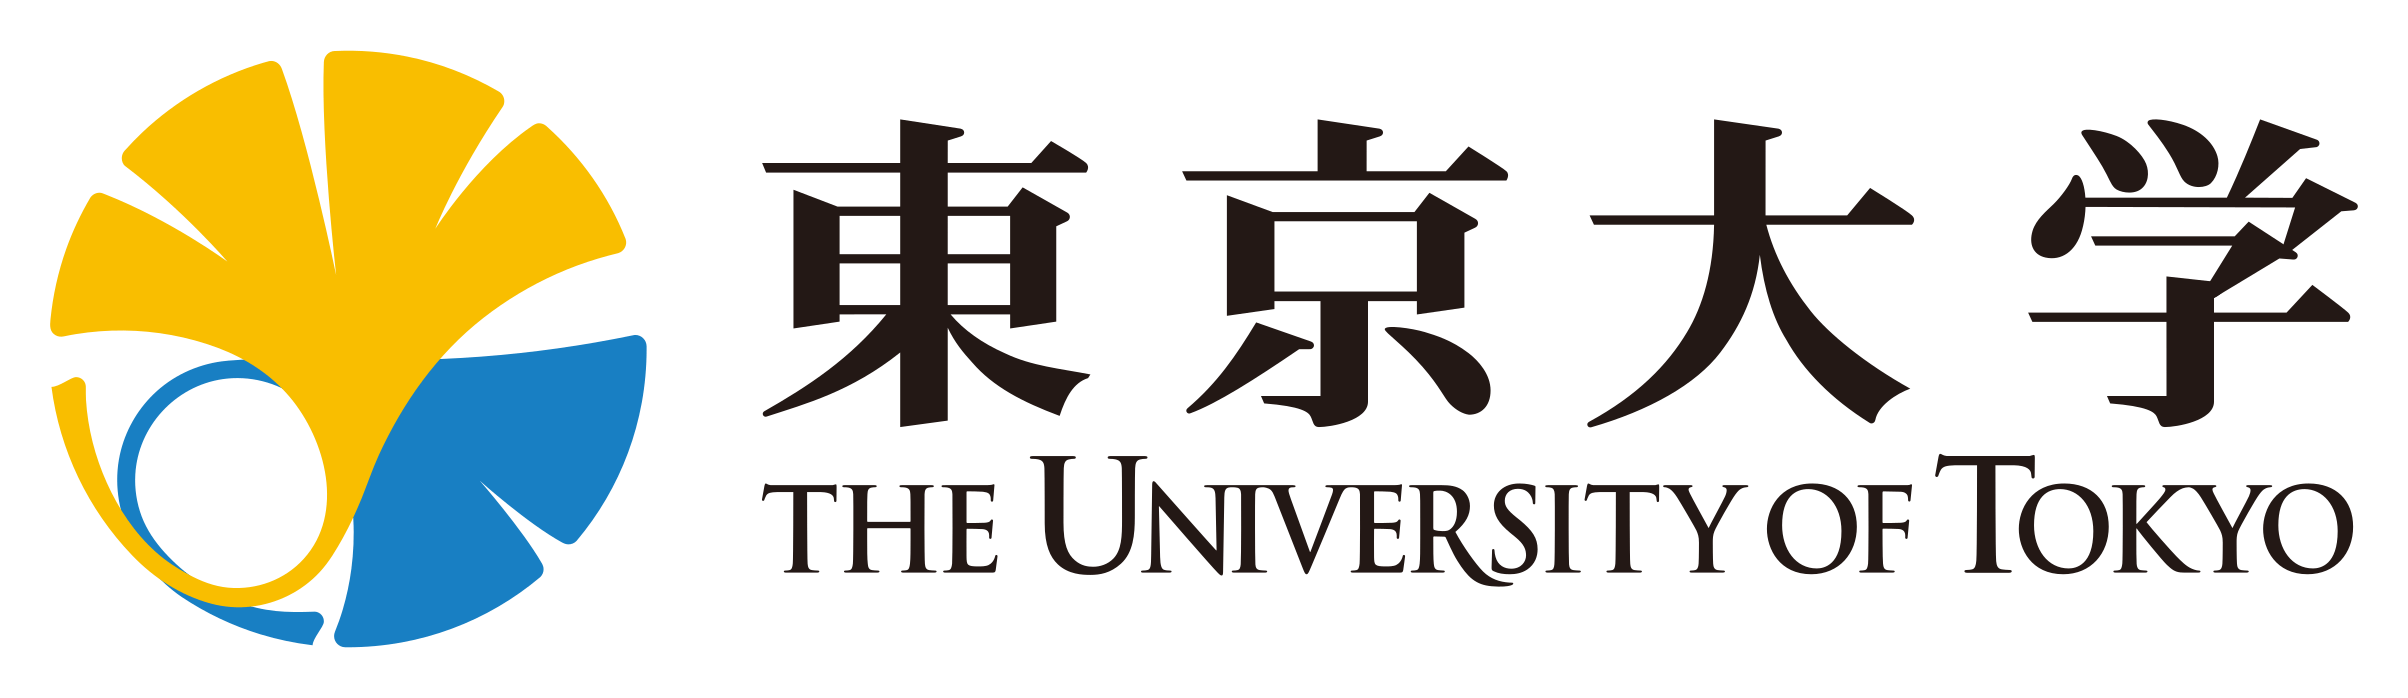 LASIGE and the University of Tokyo collaboration